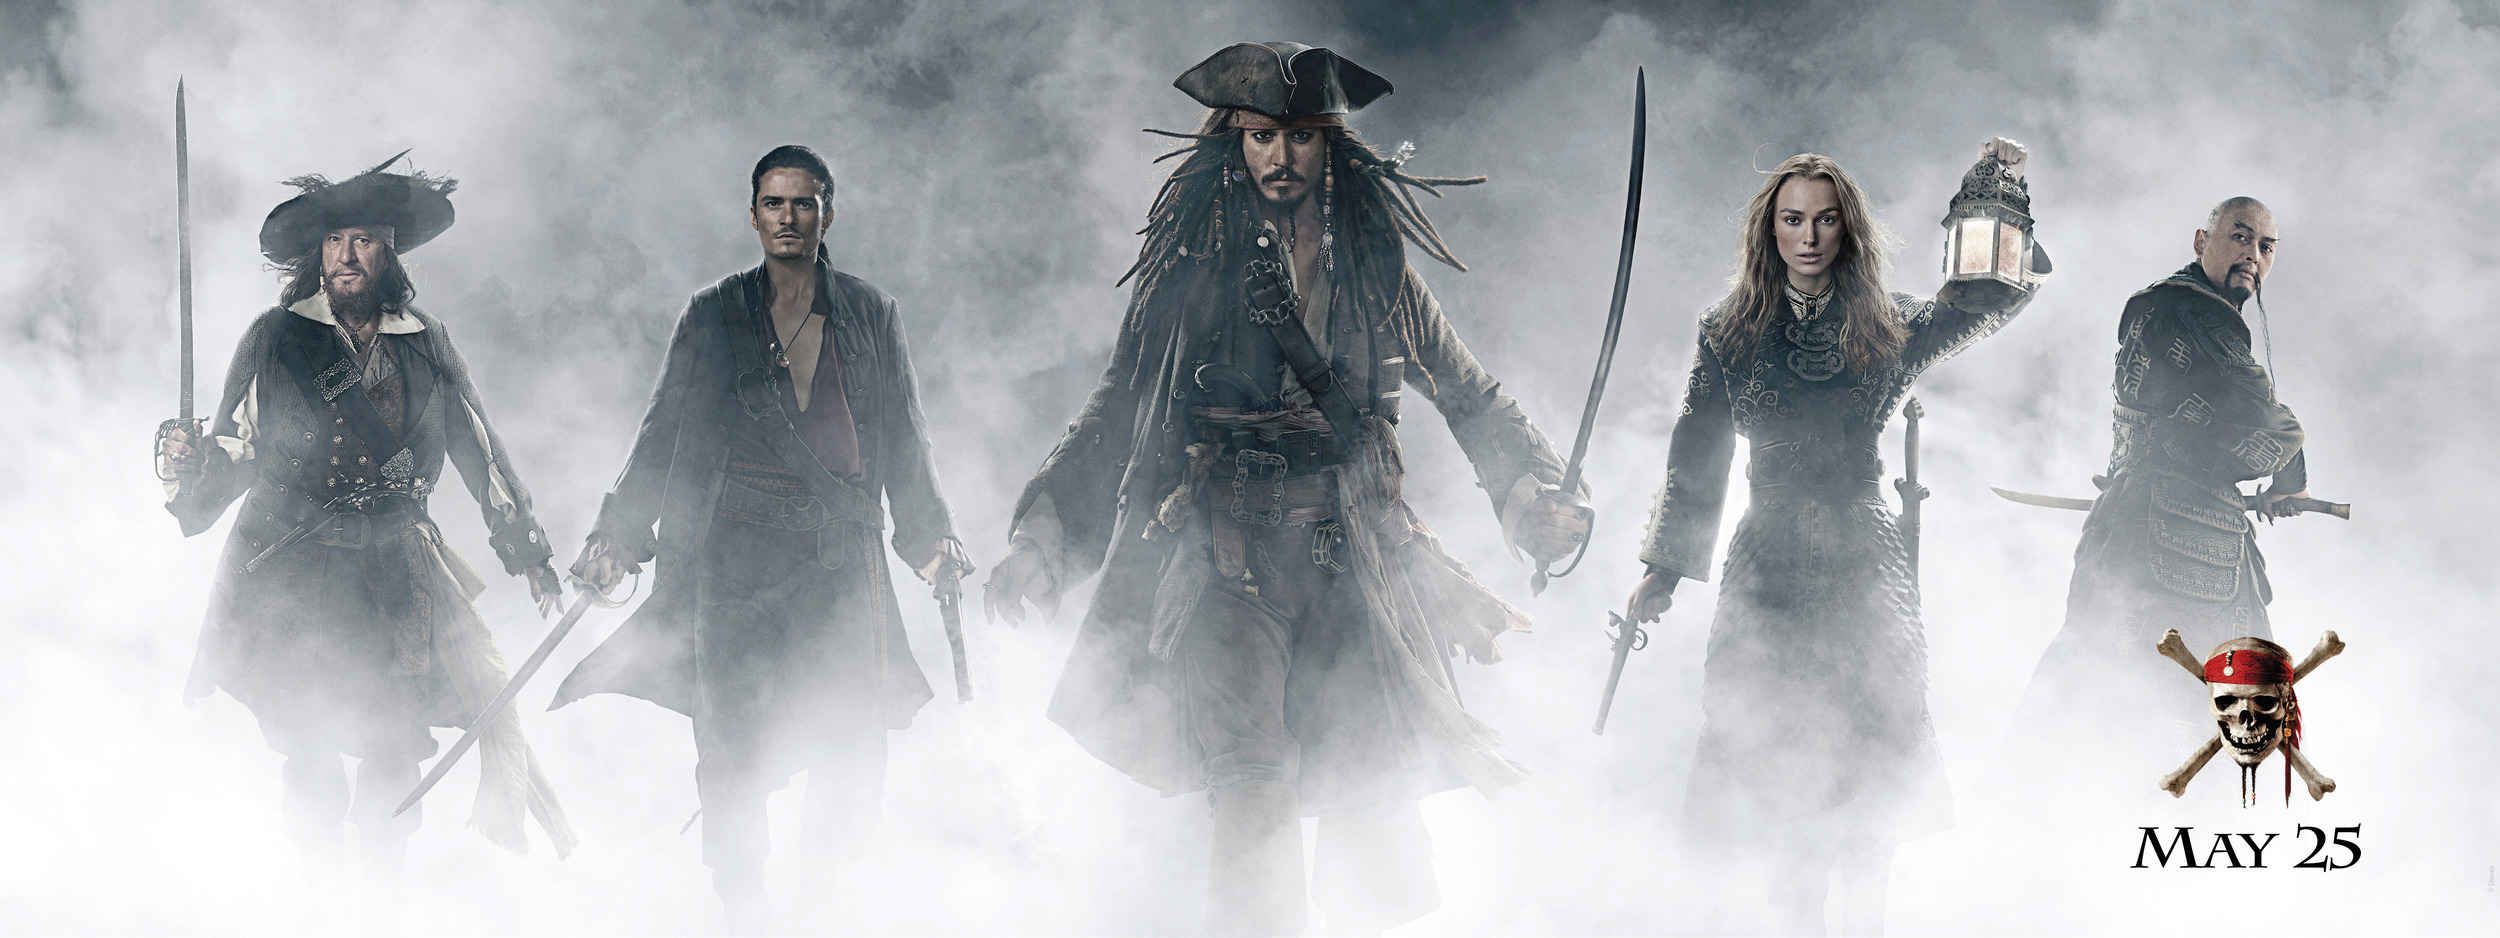 Mega Sized Movie Poster Image for Pirates of the Caribbean: At World's End (#7 of 15)